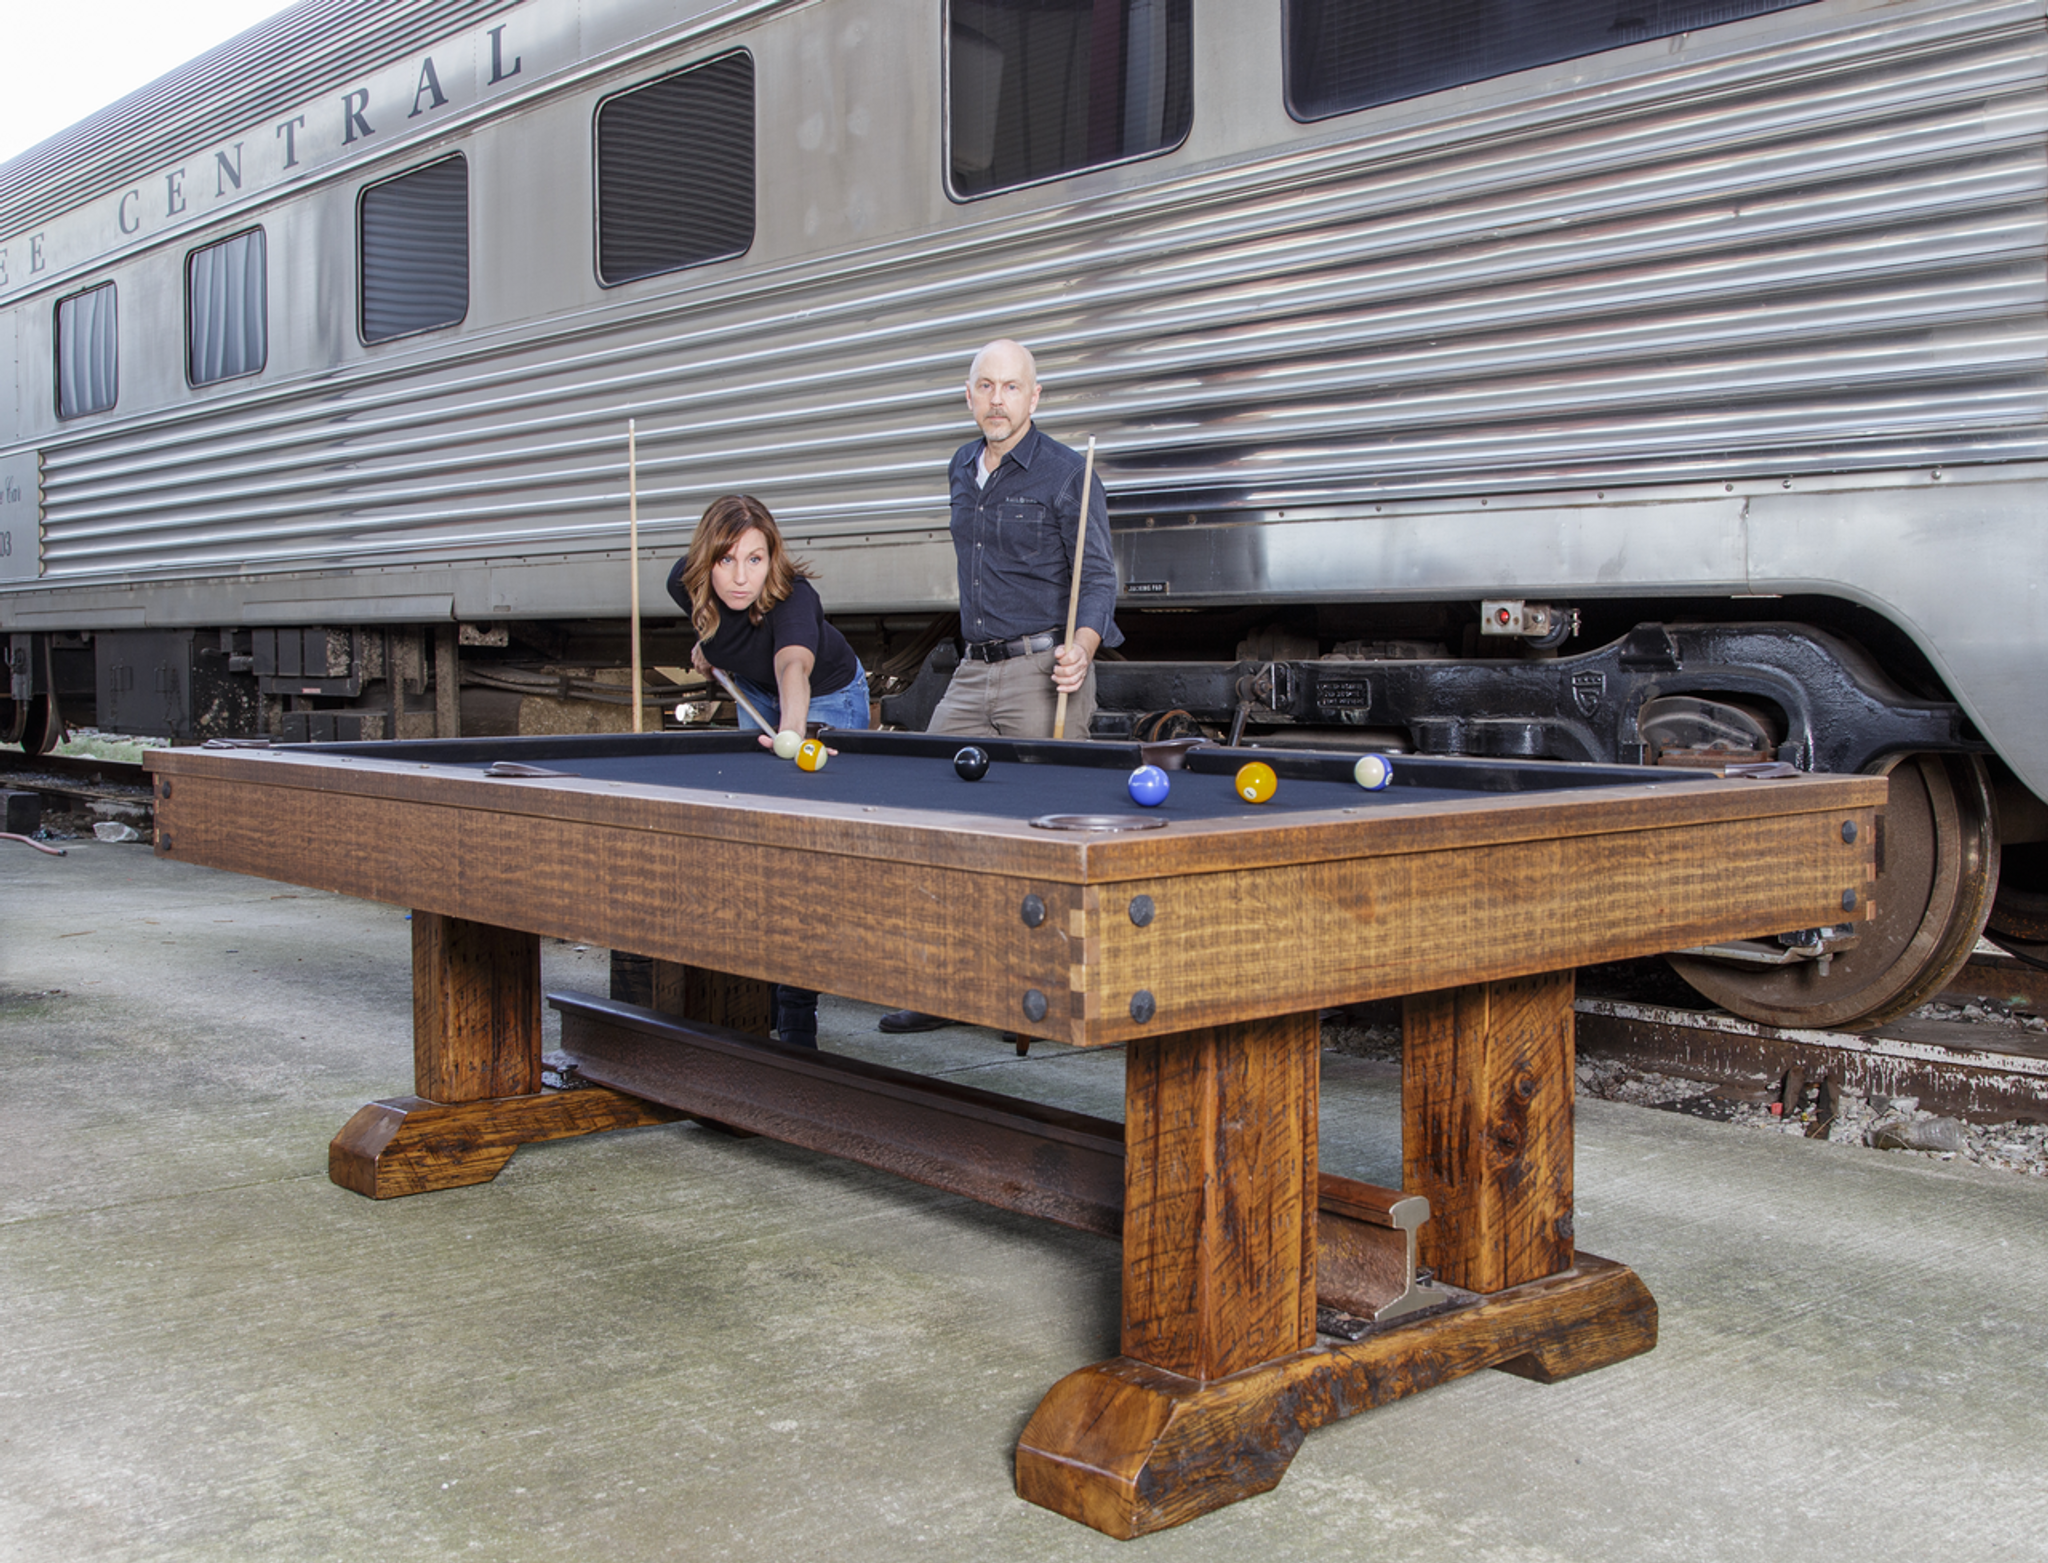 Rail Yard Pool Table (with Olhausen Billiards Company)